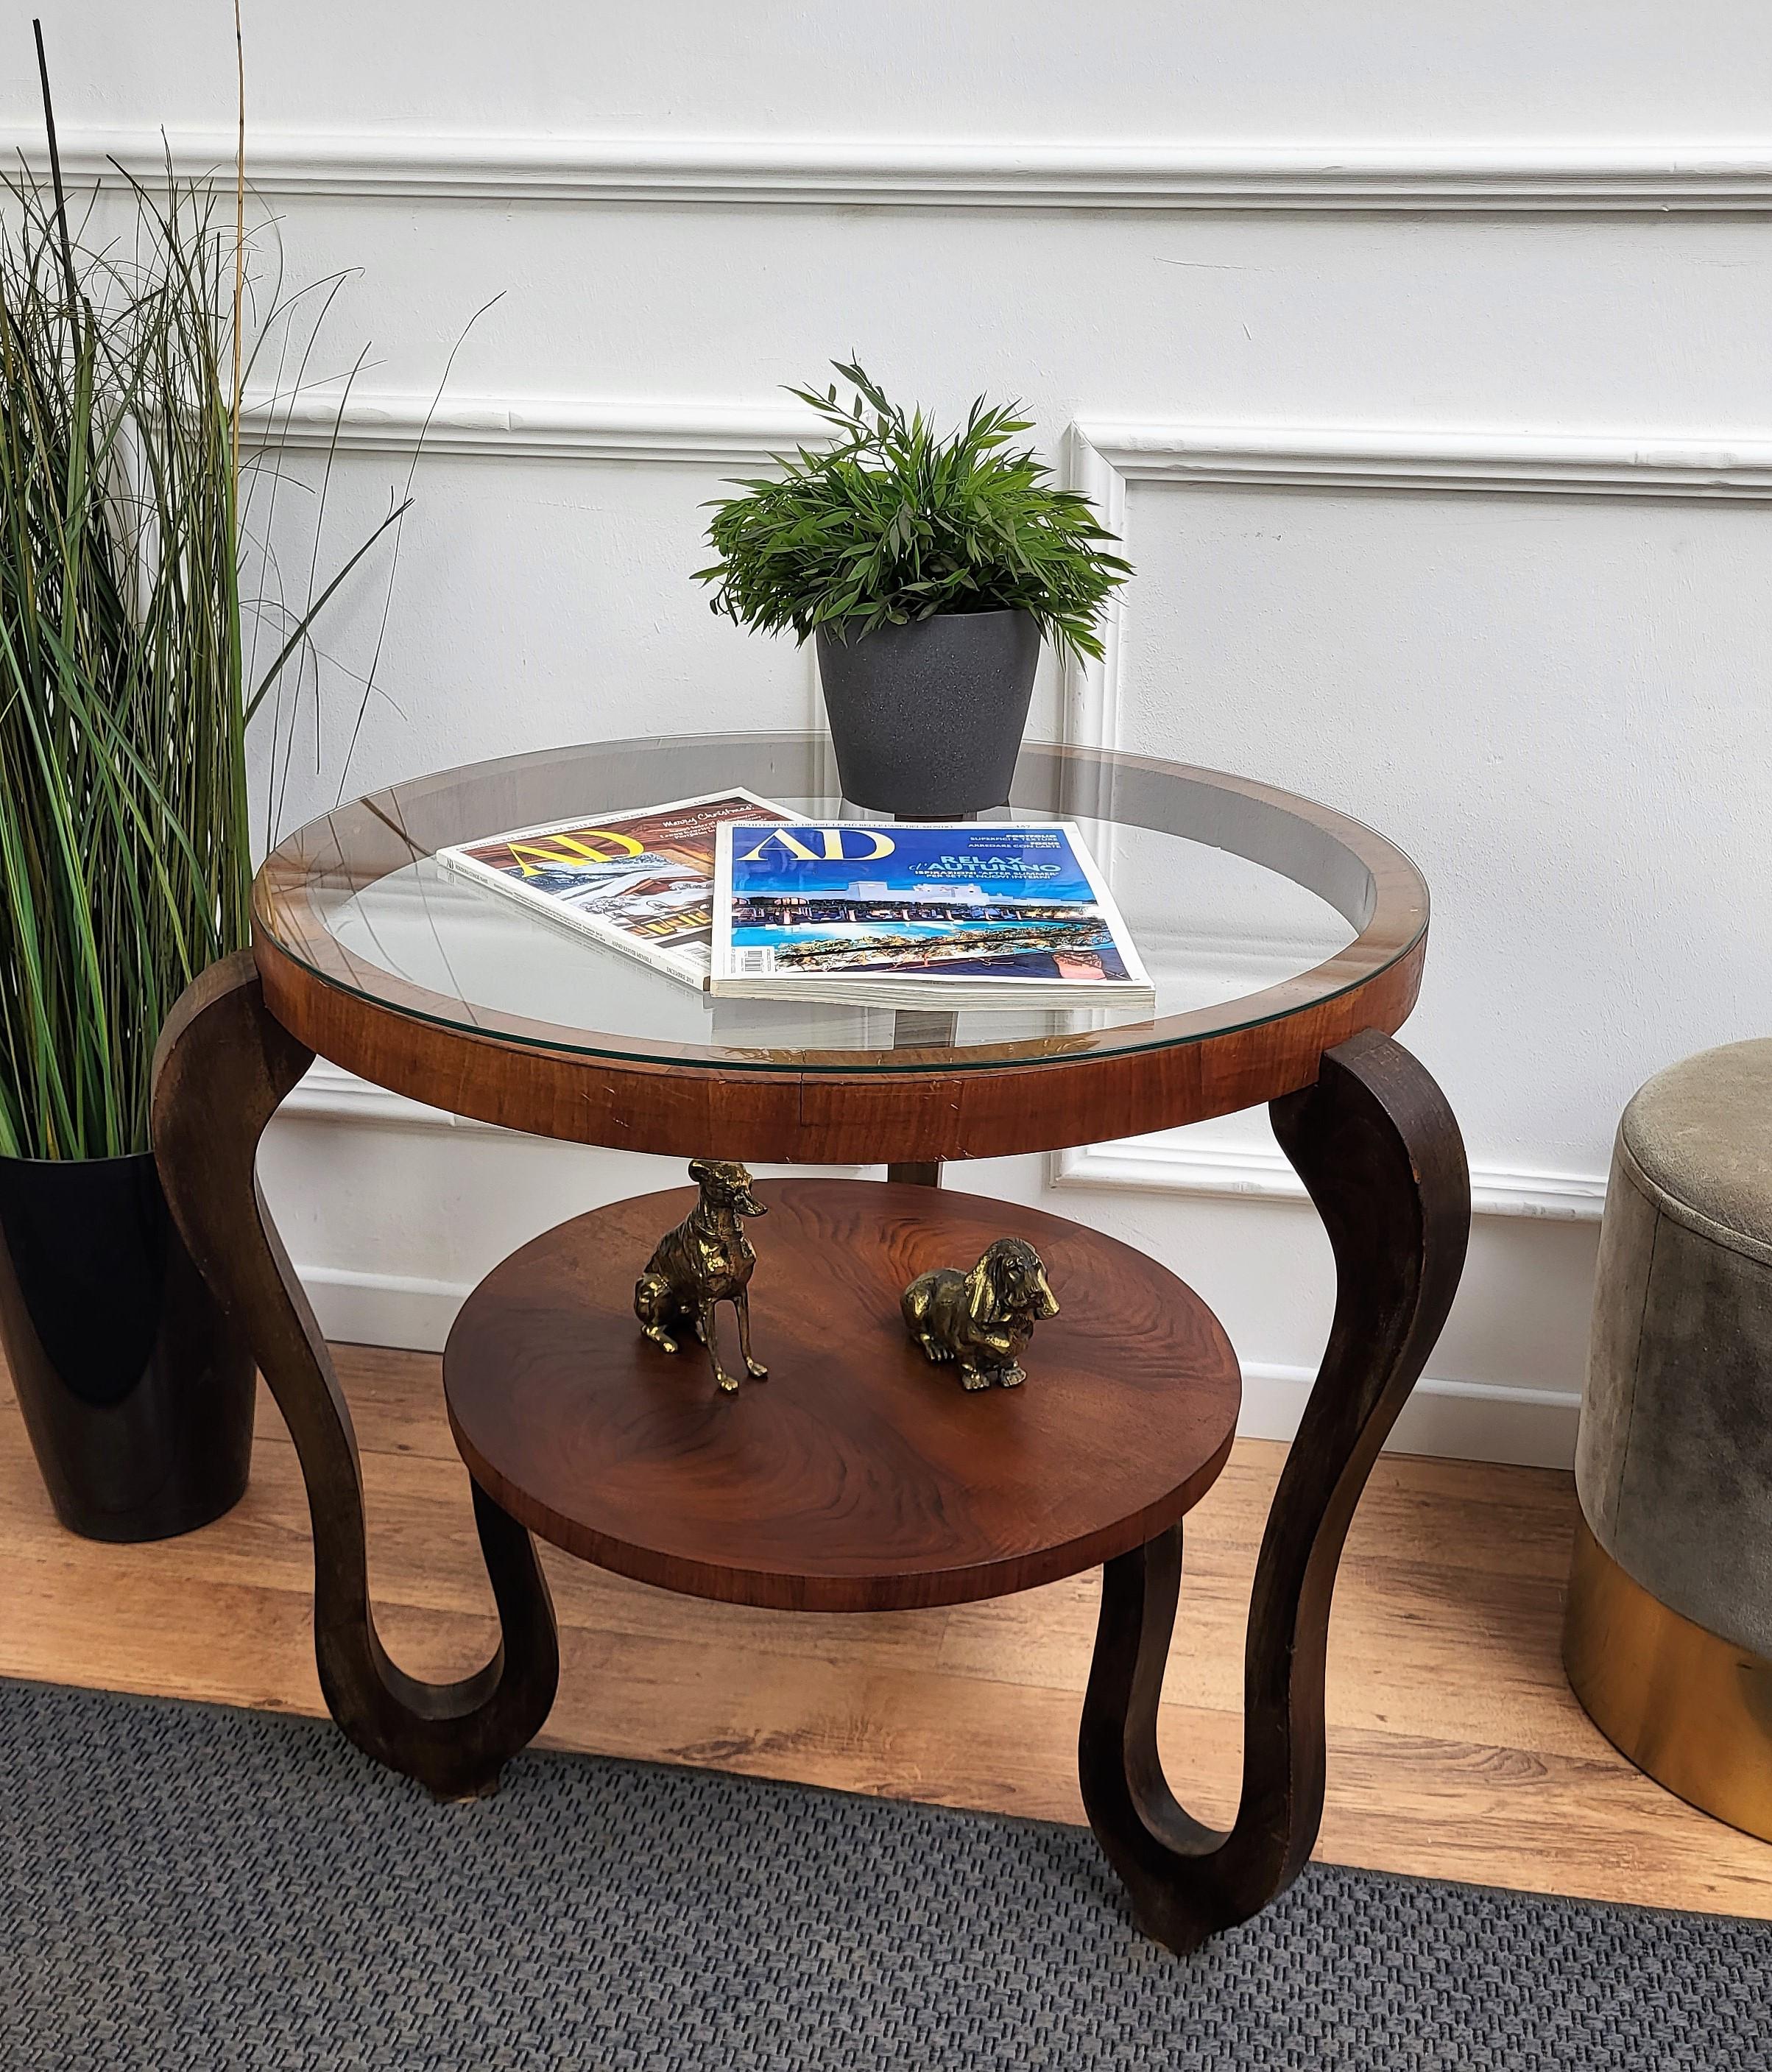 Round and very decorative Art Deco wood and glass center table or coffee table, manufactured in the 1940s in Italy. The conditions are excellent, with very minor fading and great timeless patina. A great piece that perfectly adds to every home decor